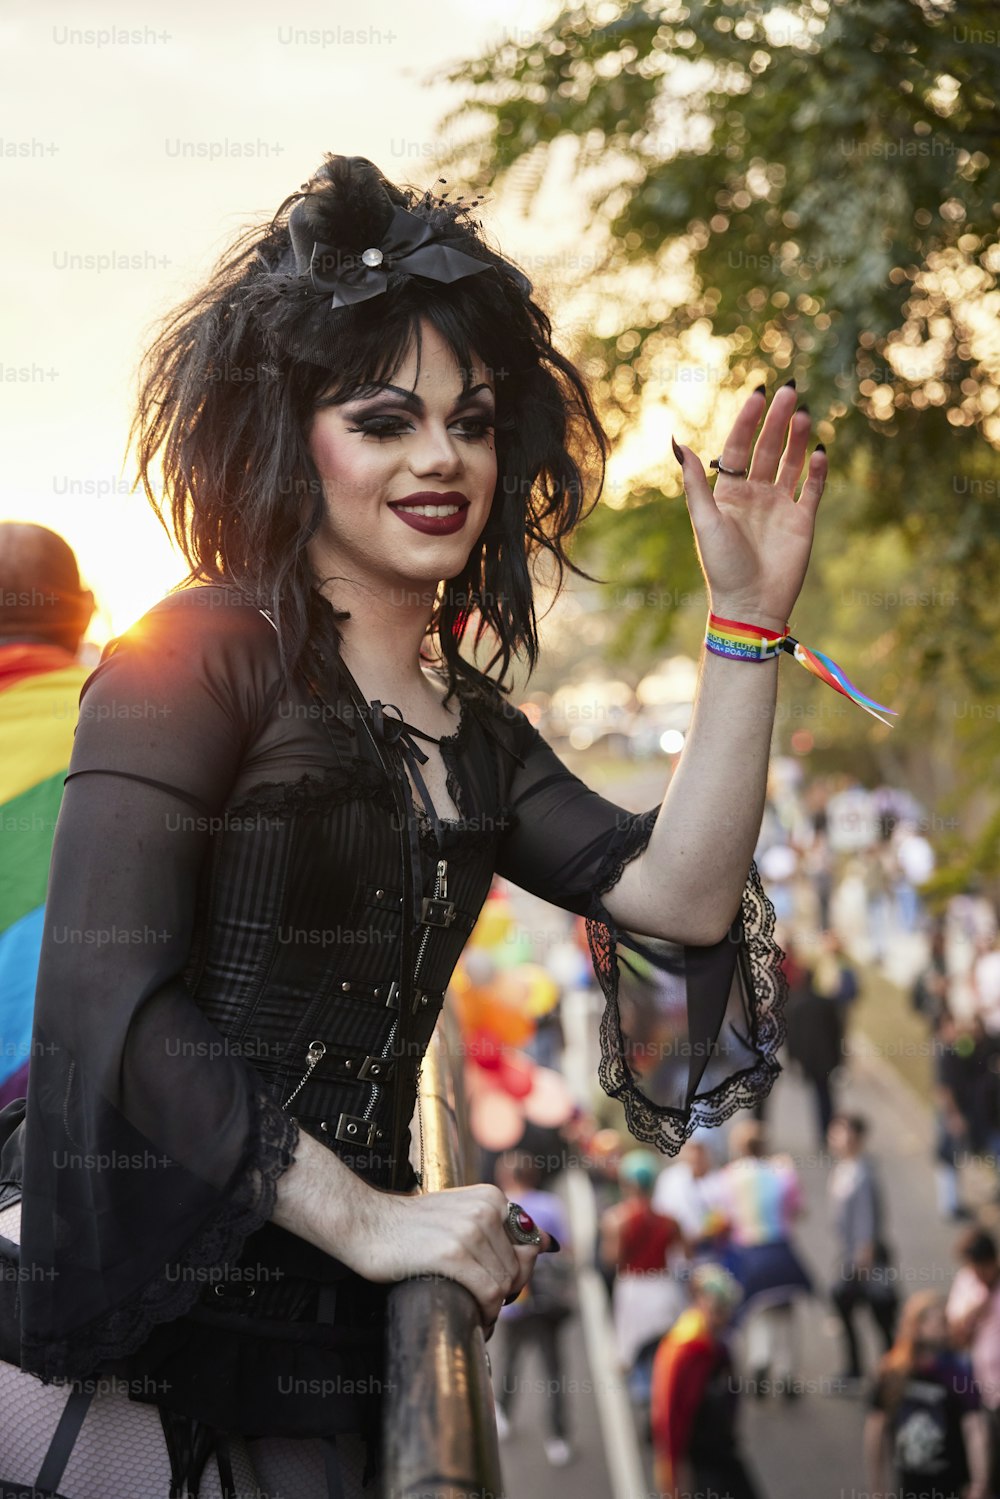 a woman with dark hair and makeup holding a rainbow flag